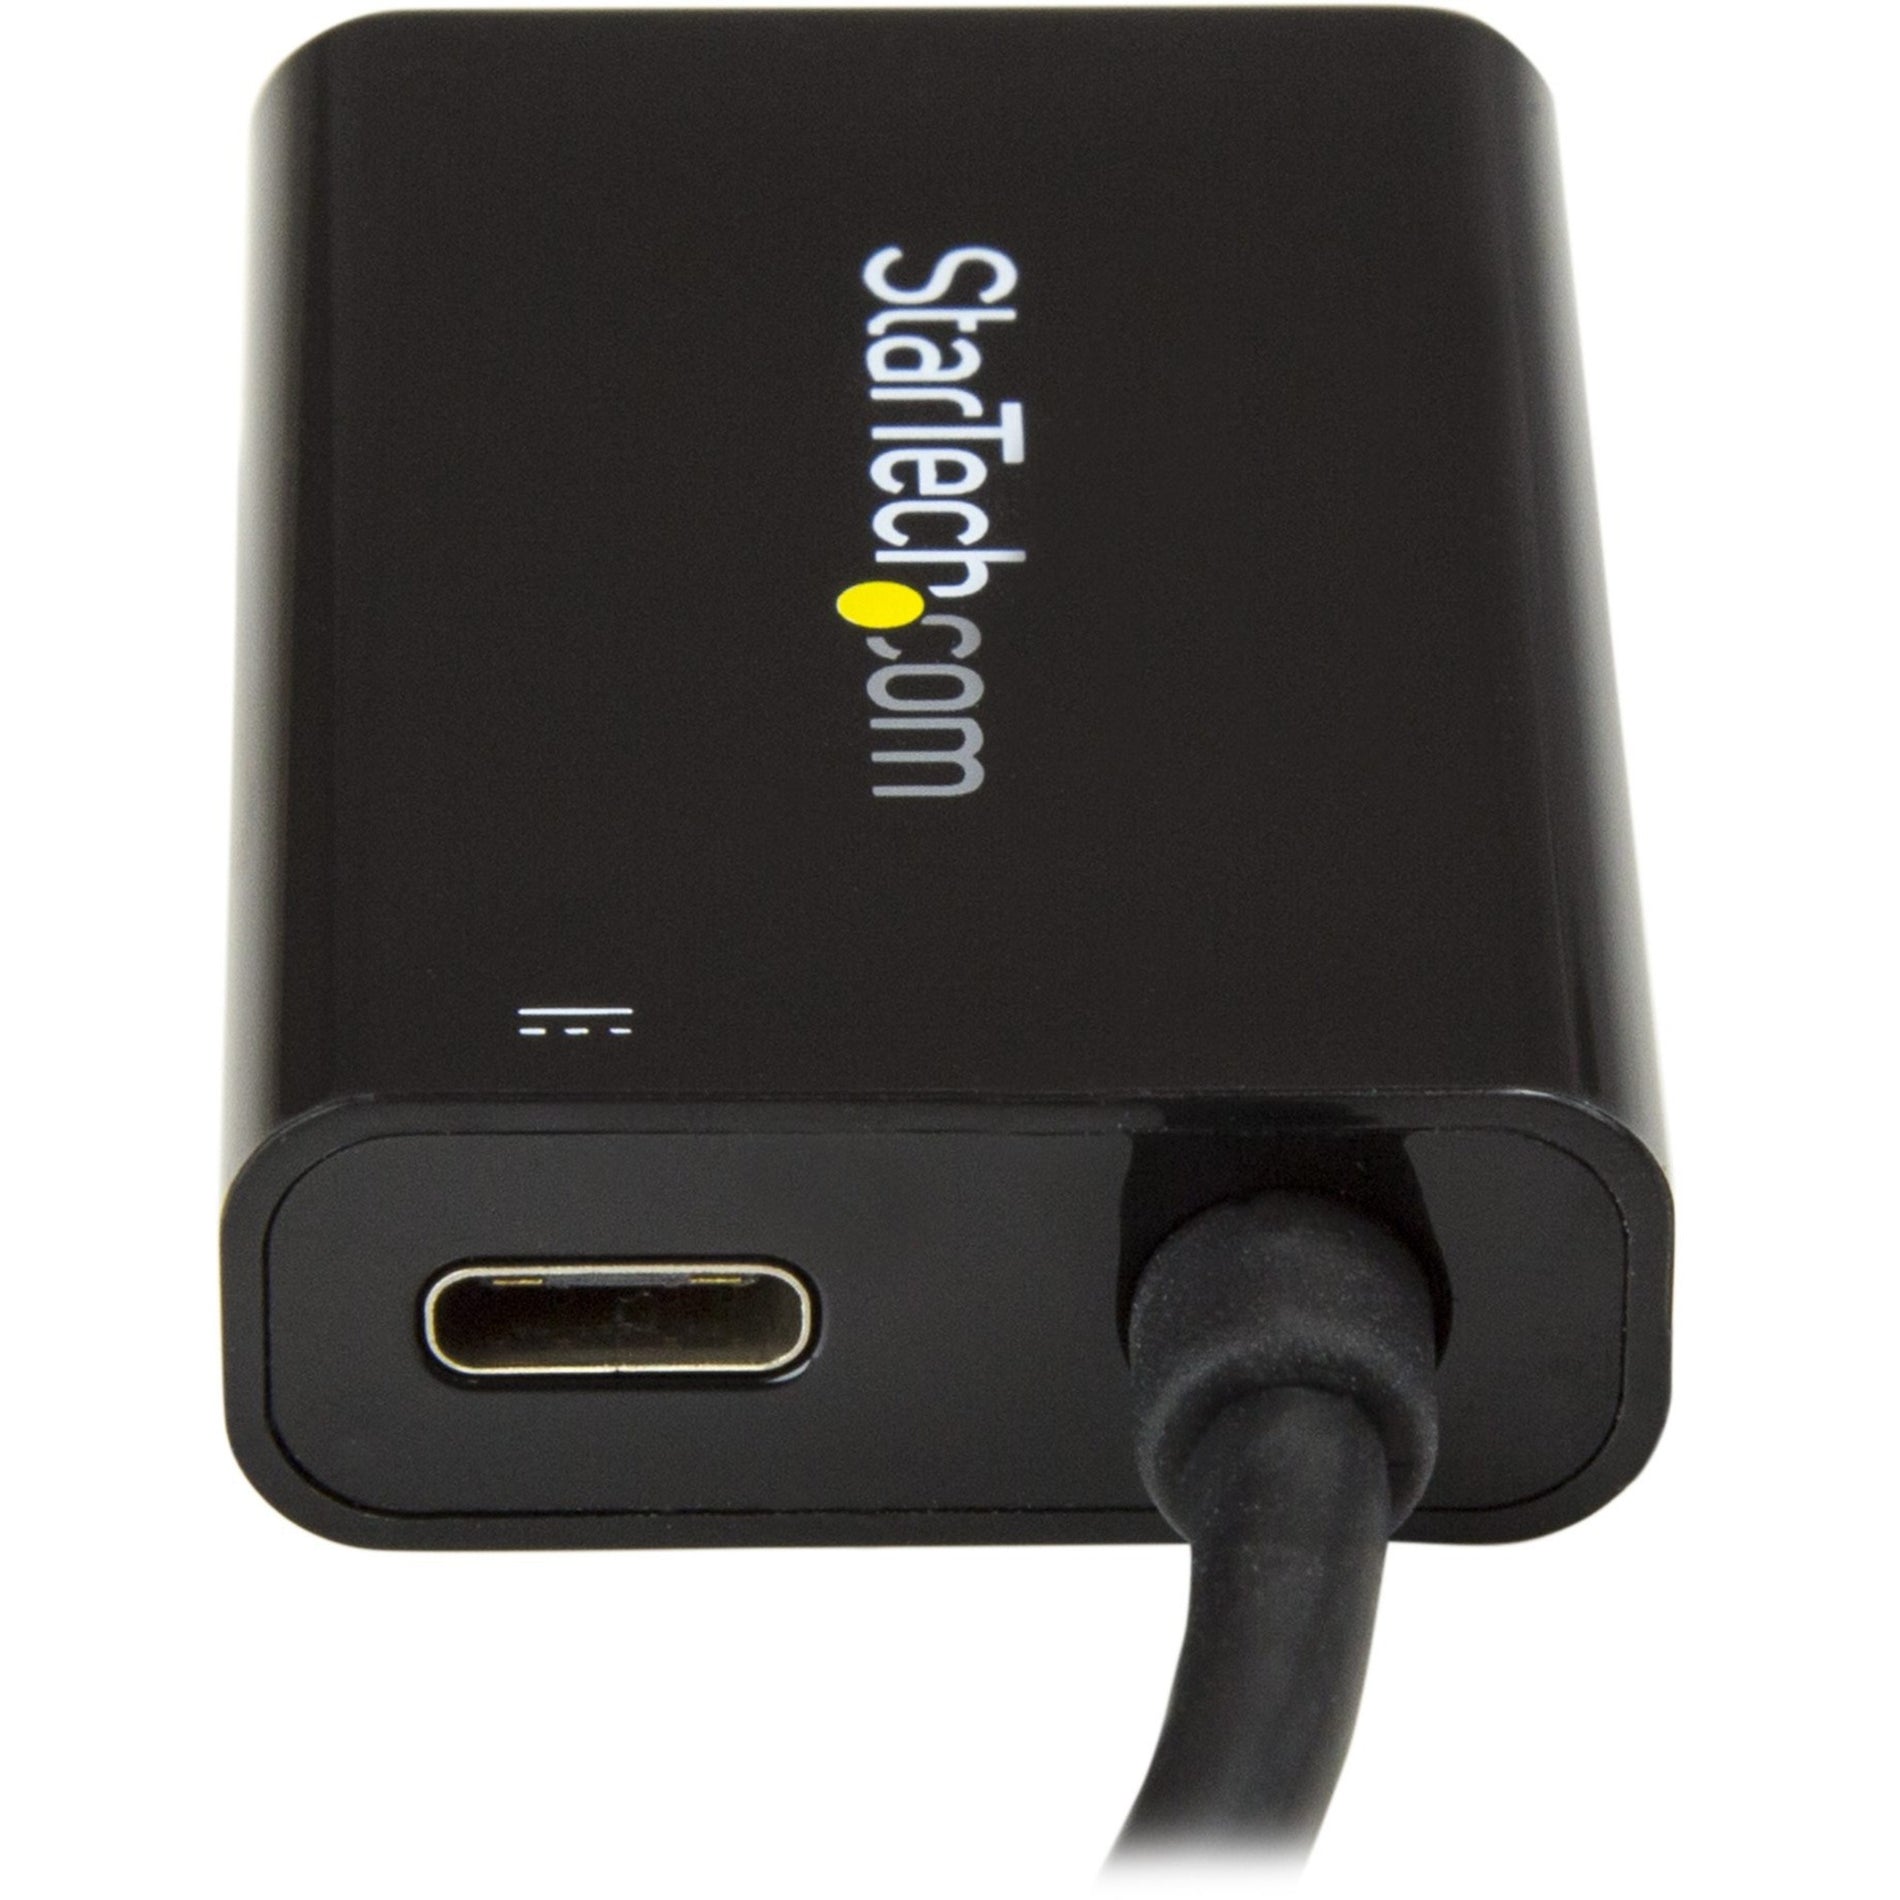 StarTech.com CDP2HDUCP USB-C auf HDMI Video Adapter mit USB Power Delivery - 4K 60Hz Plug-and-Play HDCP 2.2